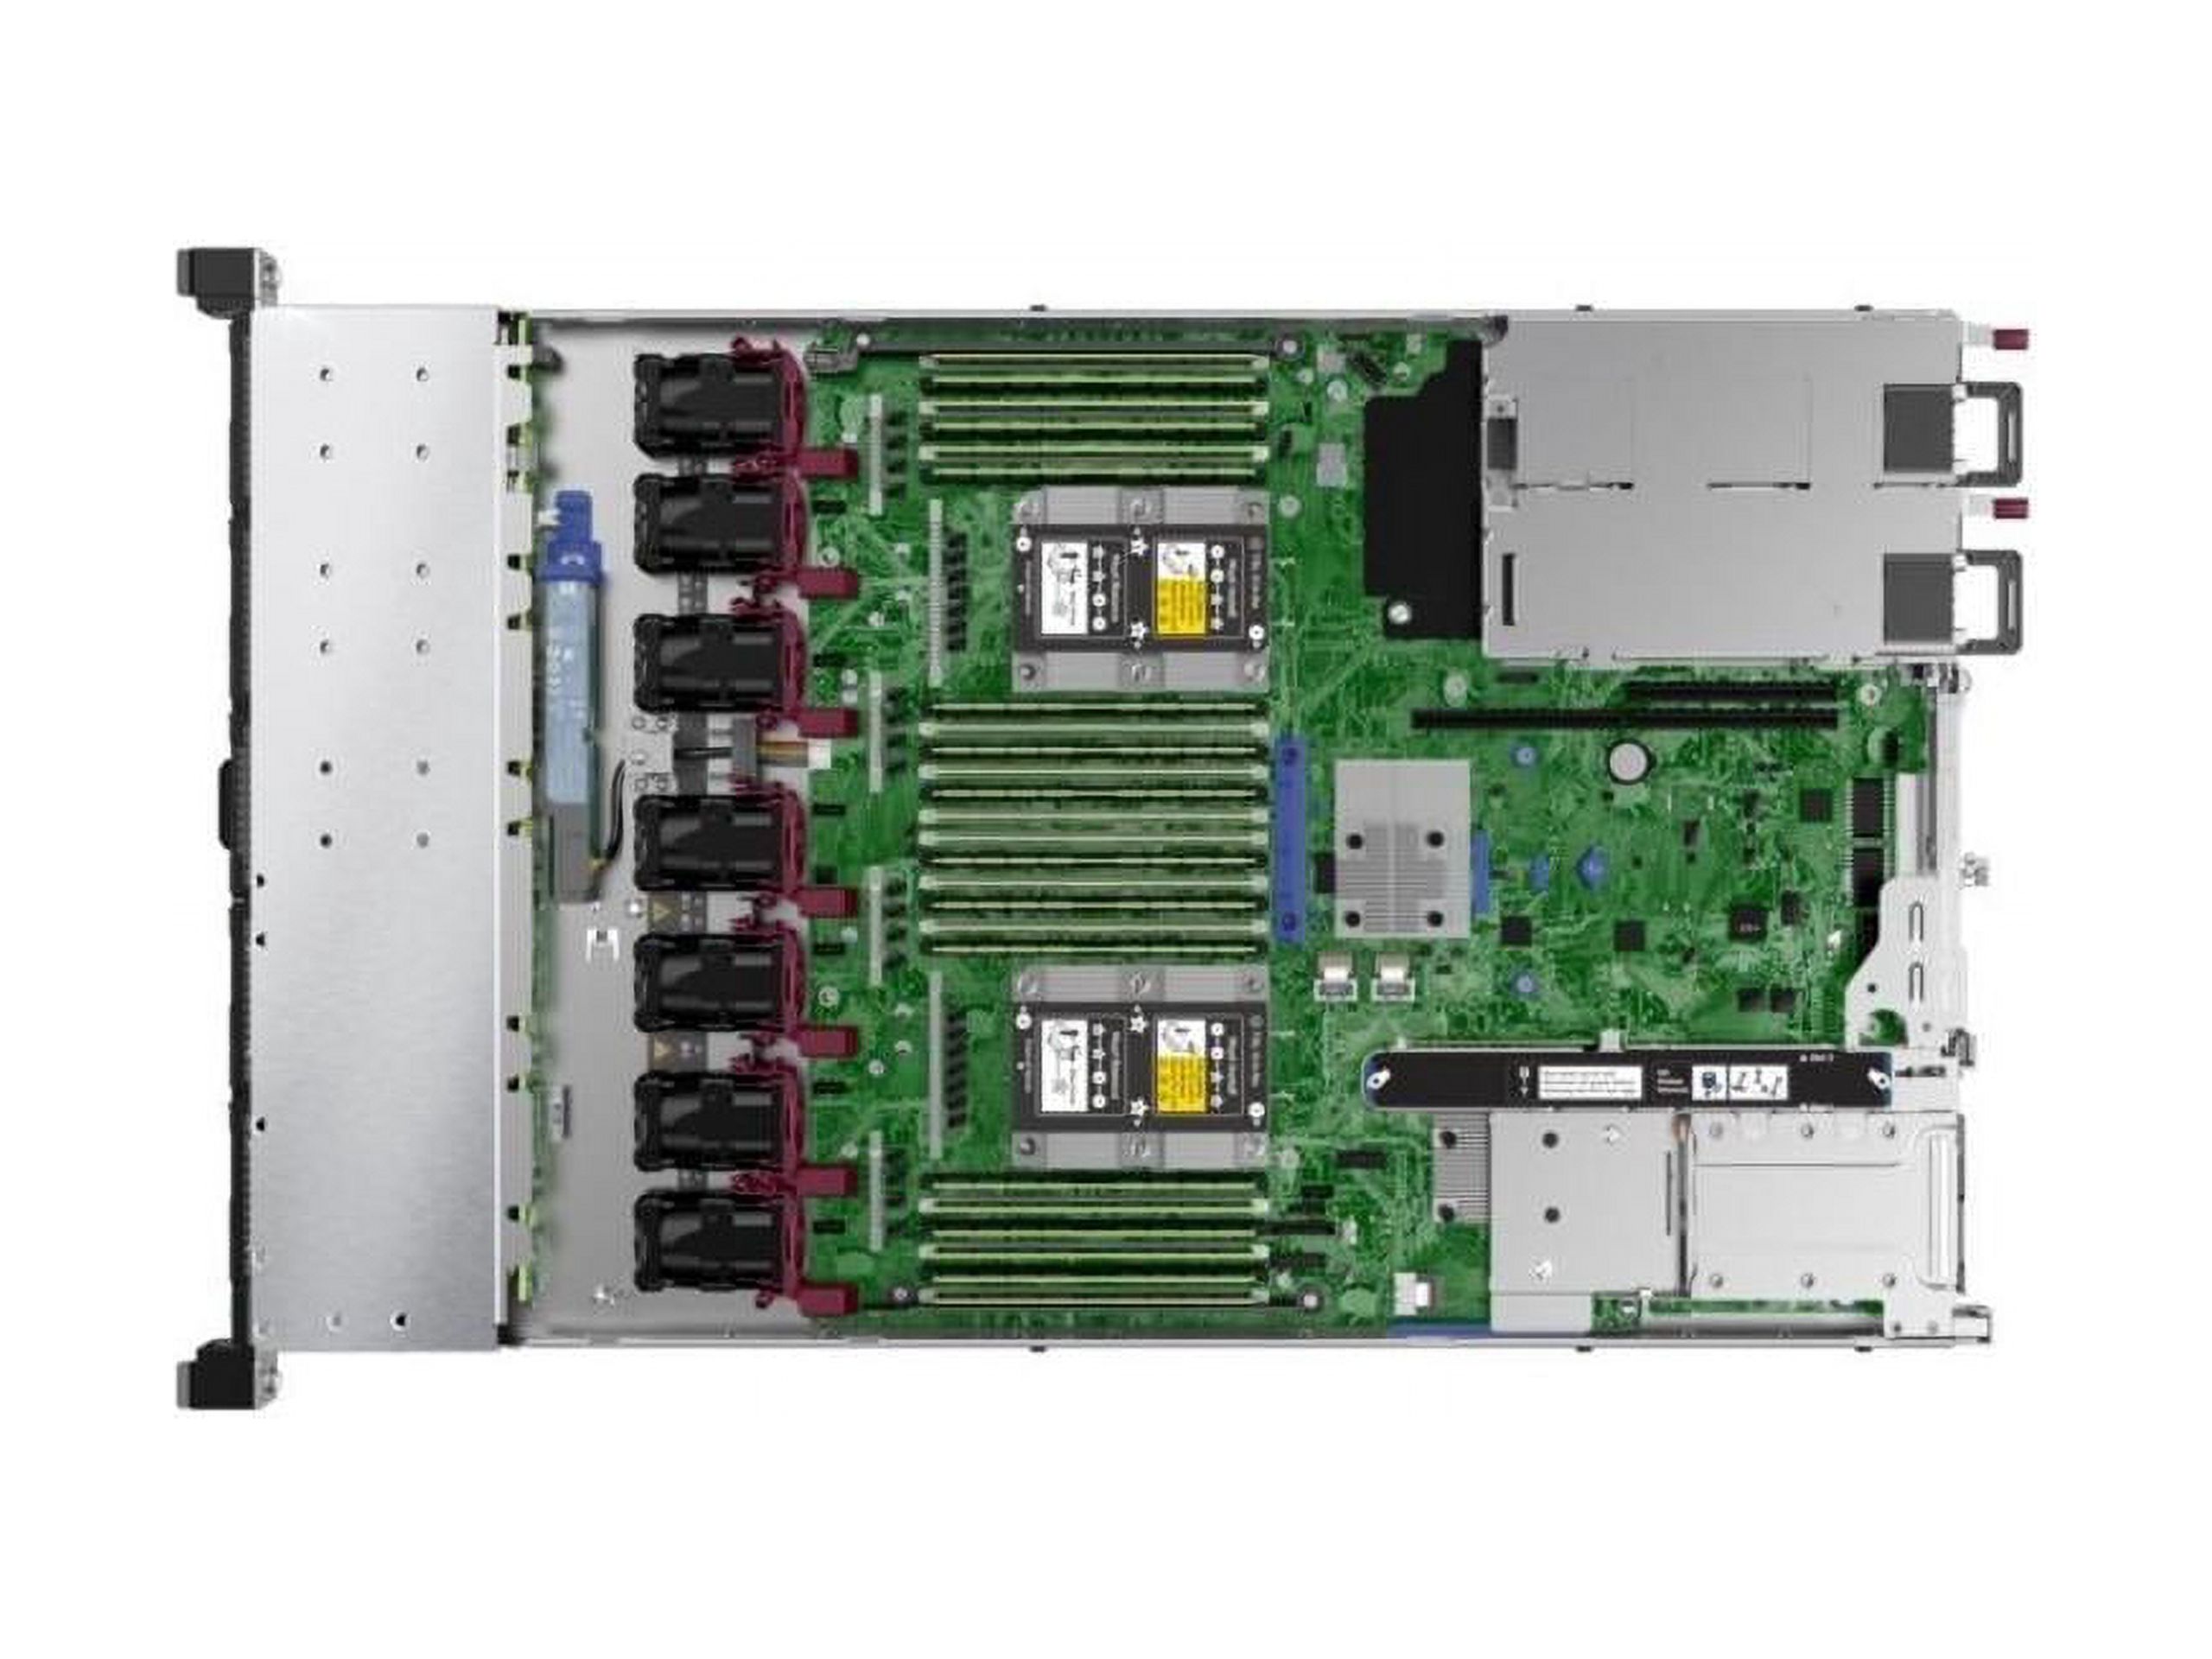 HPE ProLiant DL360 G10 1U Rack Server - 1 x Intel Xeon Silver 4208 2.10 GHz - 32 GB RAM - Serial ATA, 12Gb/s SAS Controller - Intel C621 Chip - 2 Processor Support - 1.54 TB RAM Support - Up to 16 MB - image 5 of 5